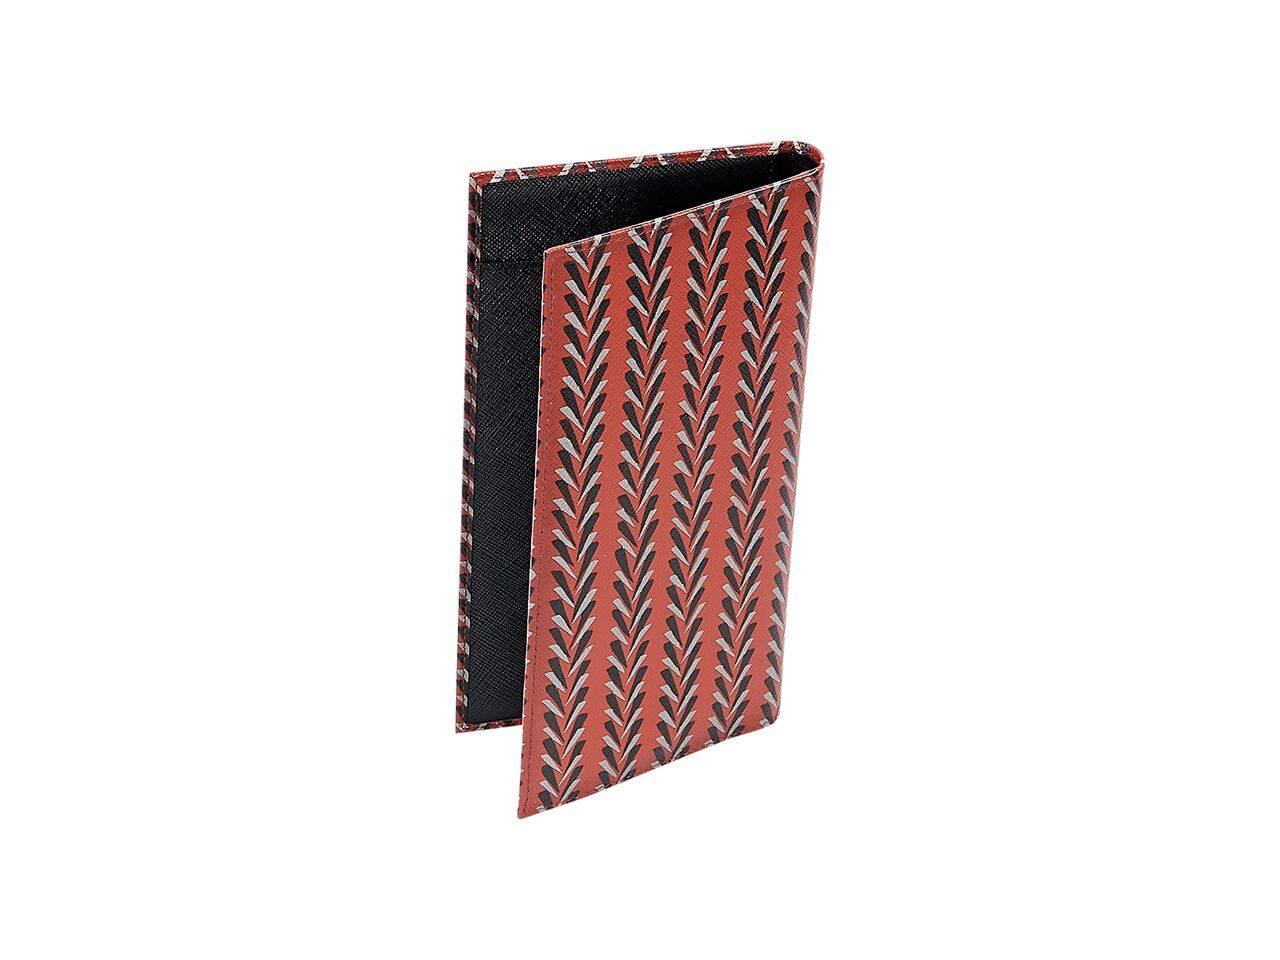 Product details:  Red printed saffiano leather cardholder wallet by Prada.  Lined interior with multiple credit card slots.  4.5